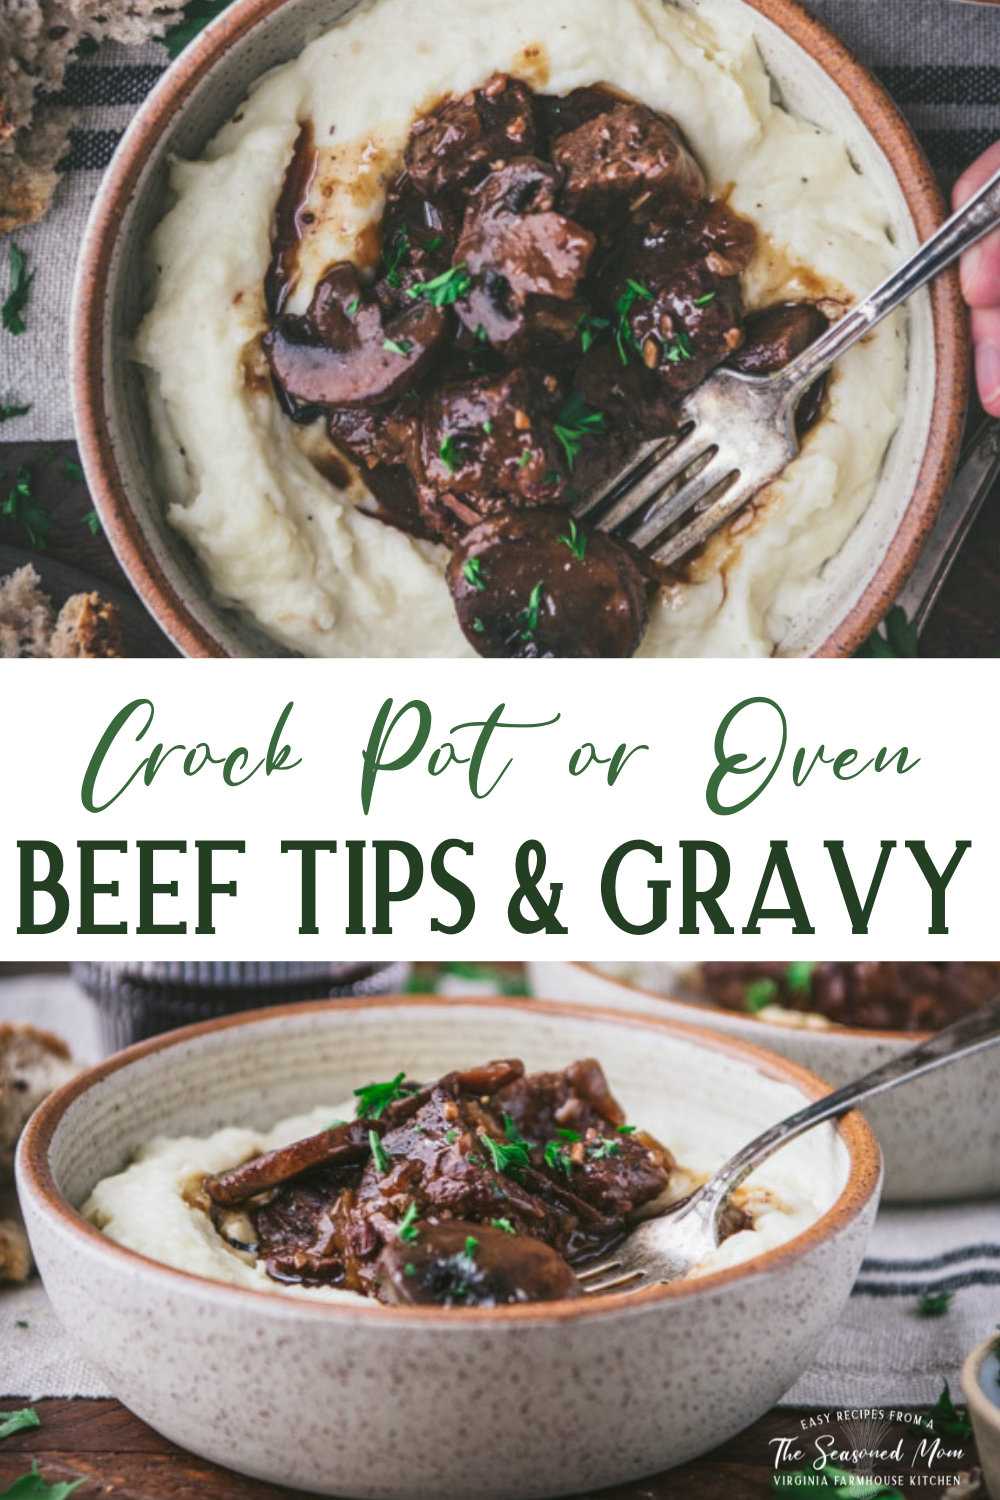 Beef Tips and Gravy {Crock Pot or Oven} - The Seasoned Mom